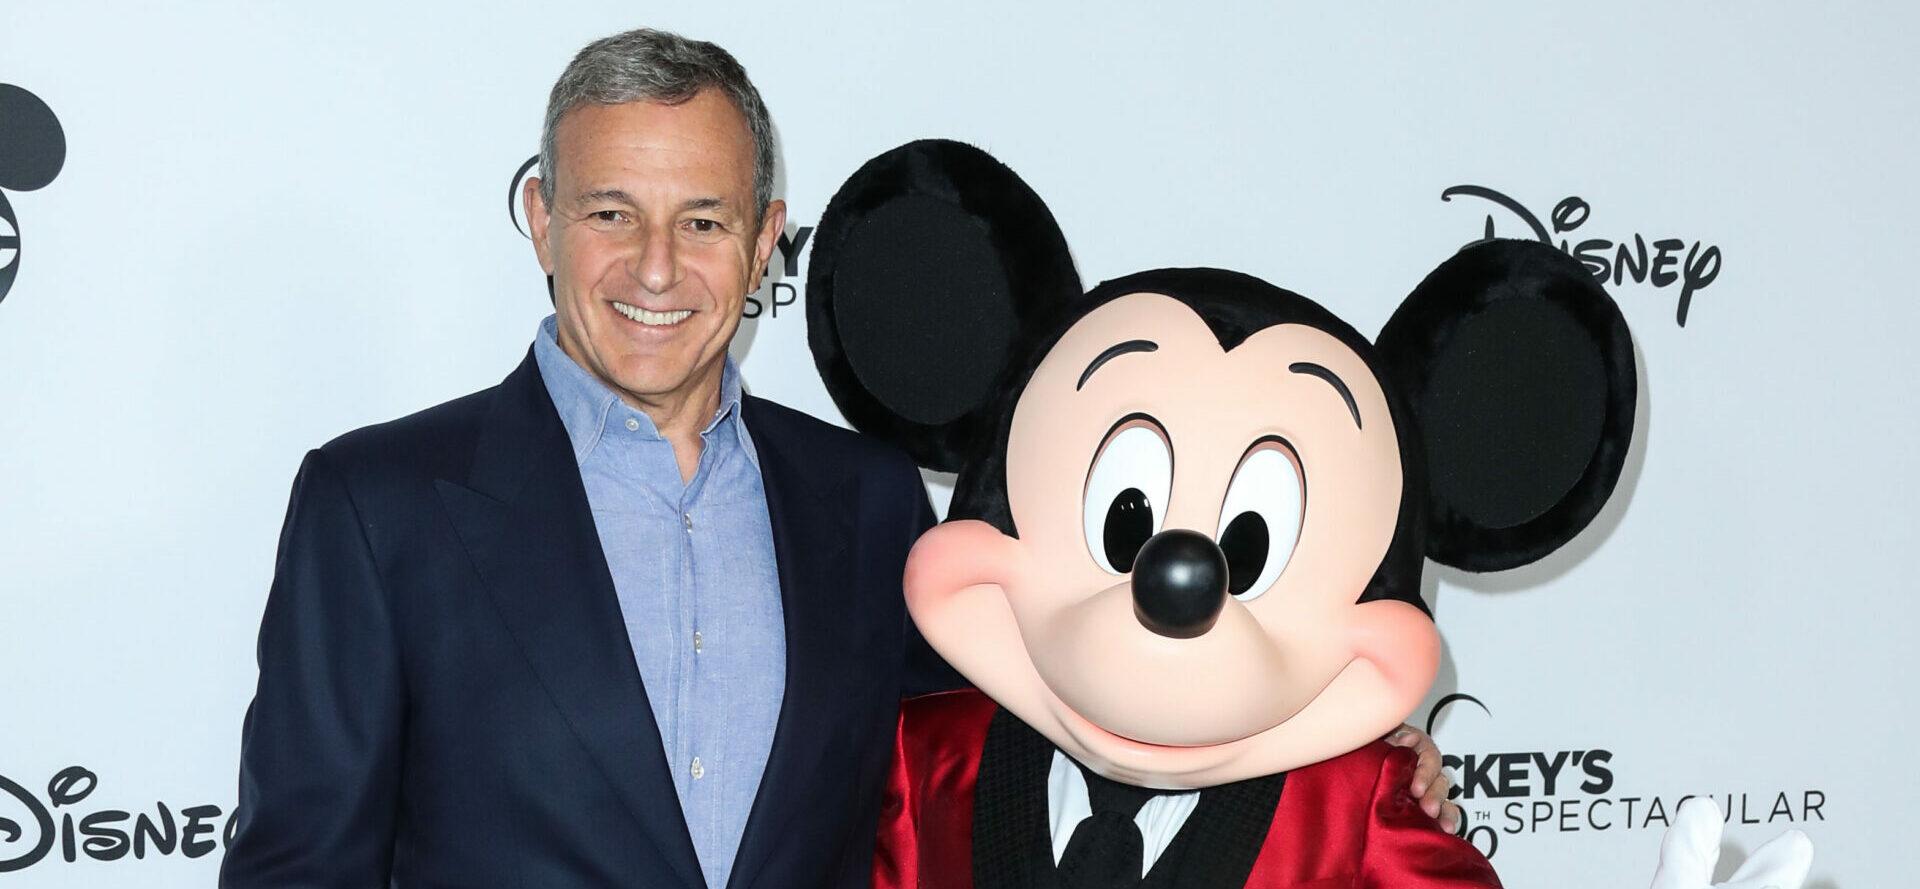 Petition For Disney To Fire Bob Iger As CEO Re-Emerges